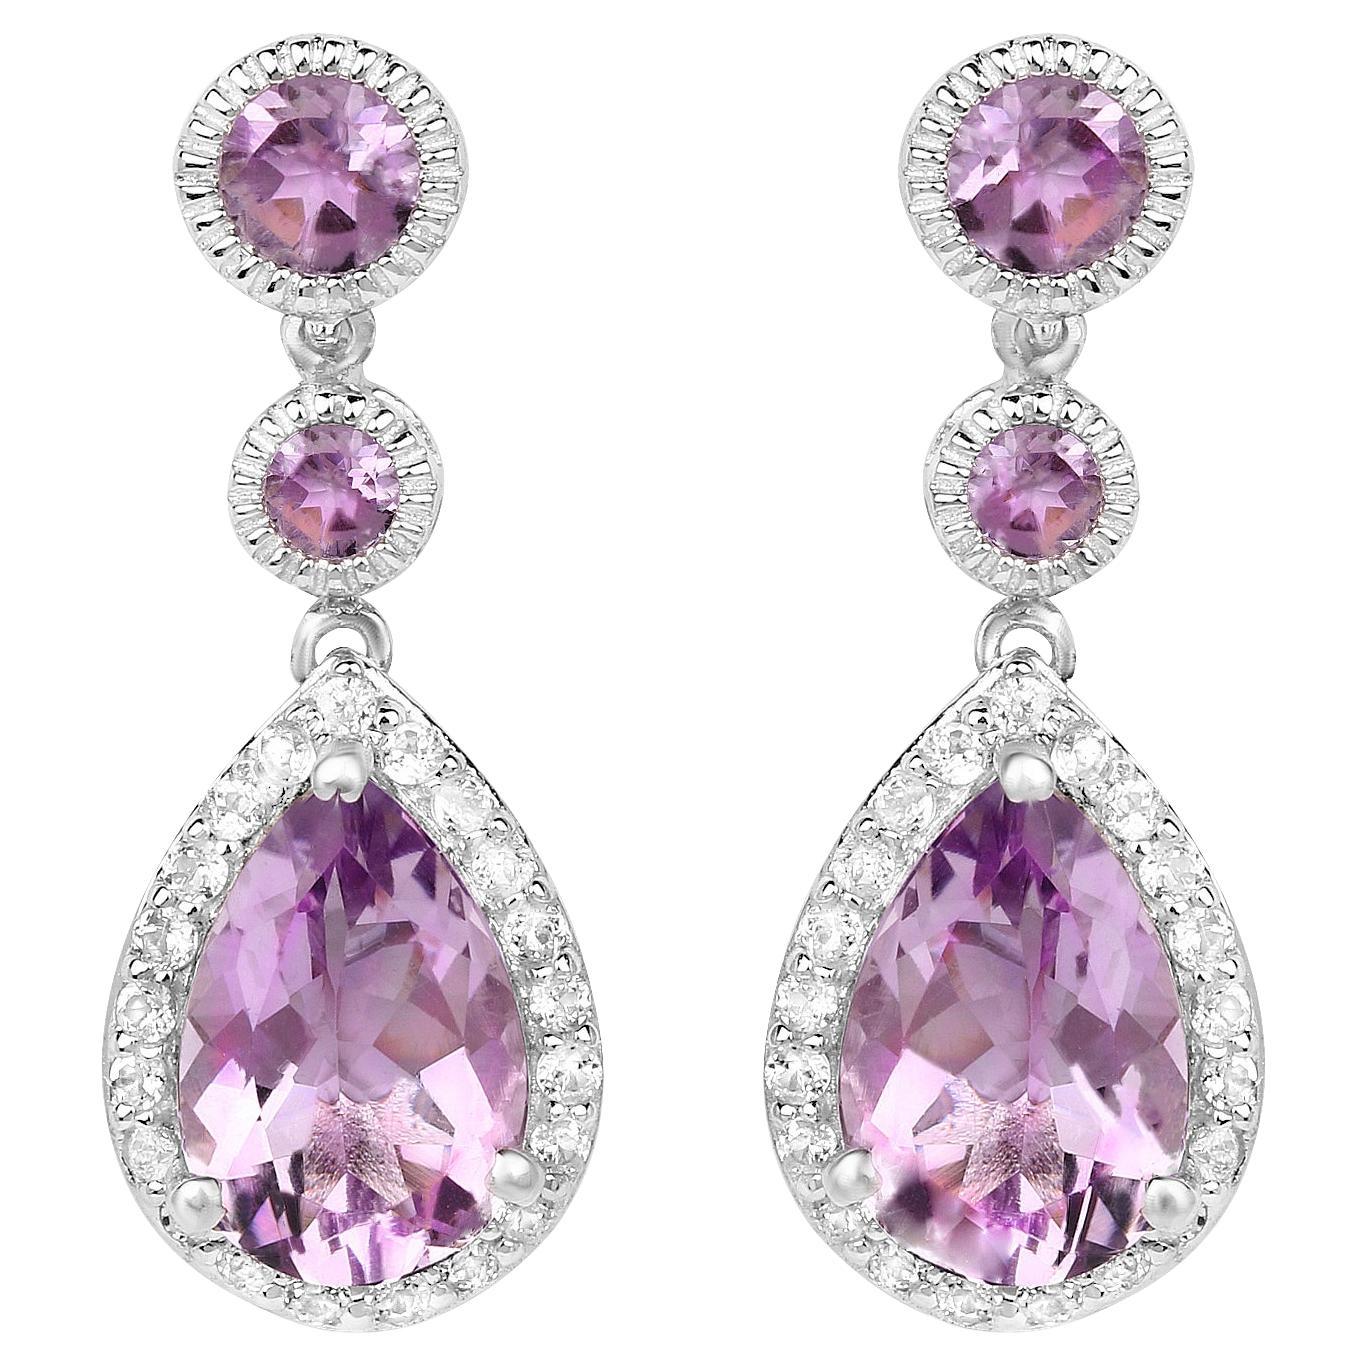 Amethyst Earrings With White Topazes 7.16 Carats Rhodium Plated Sterling Silver For Sale